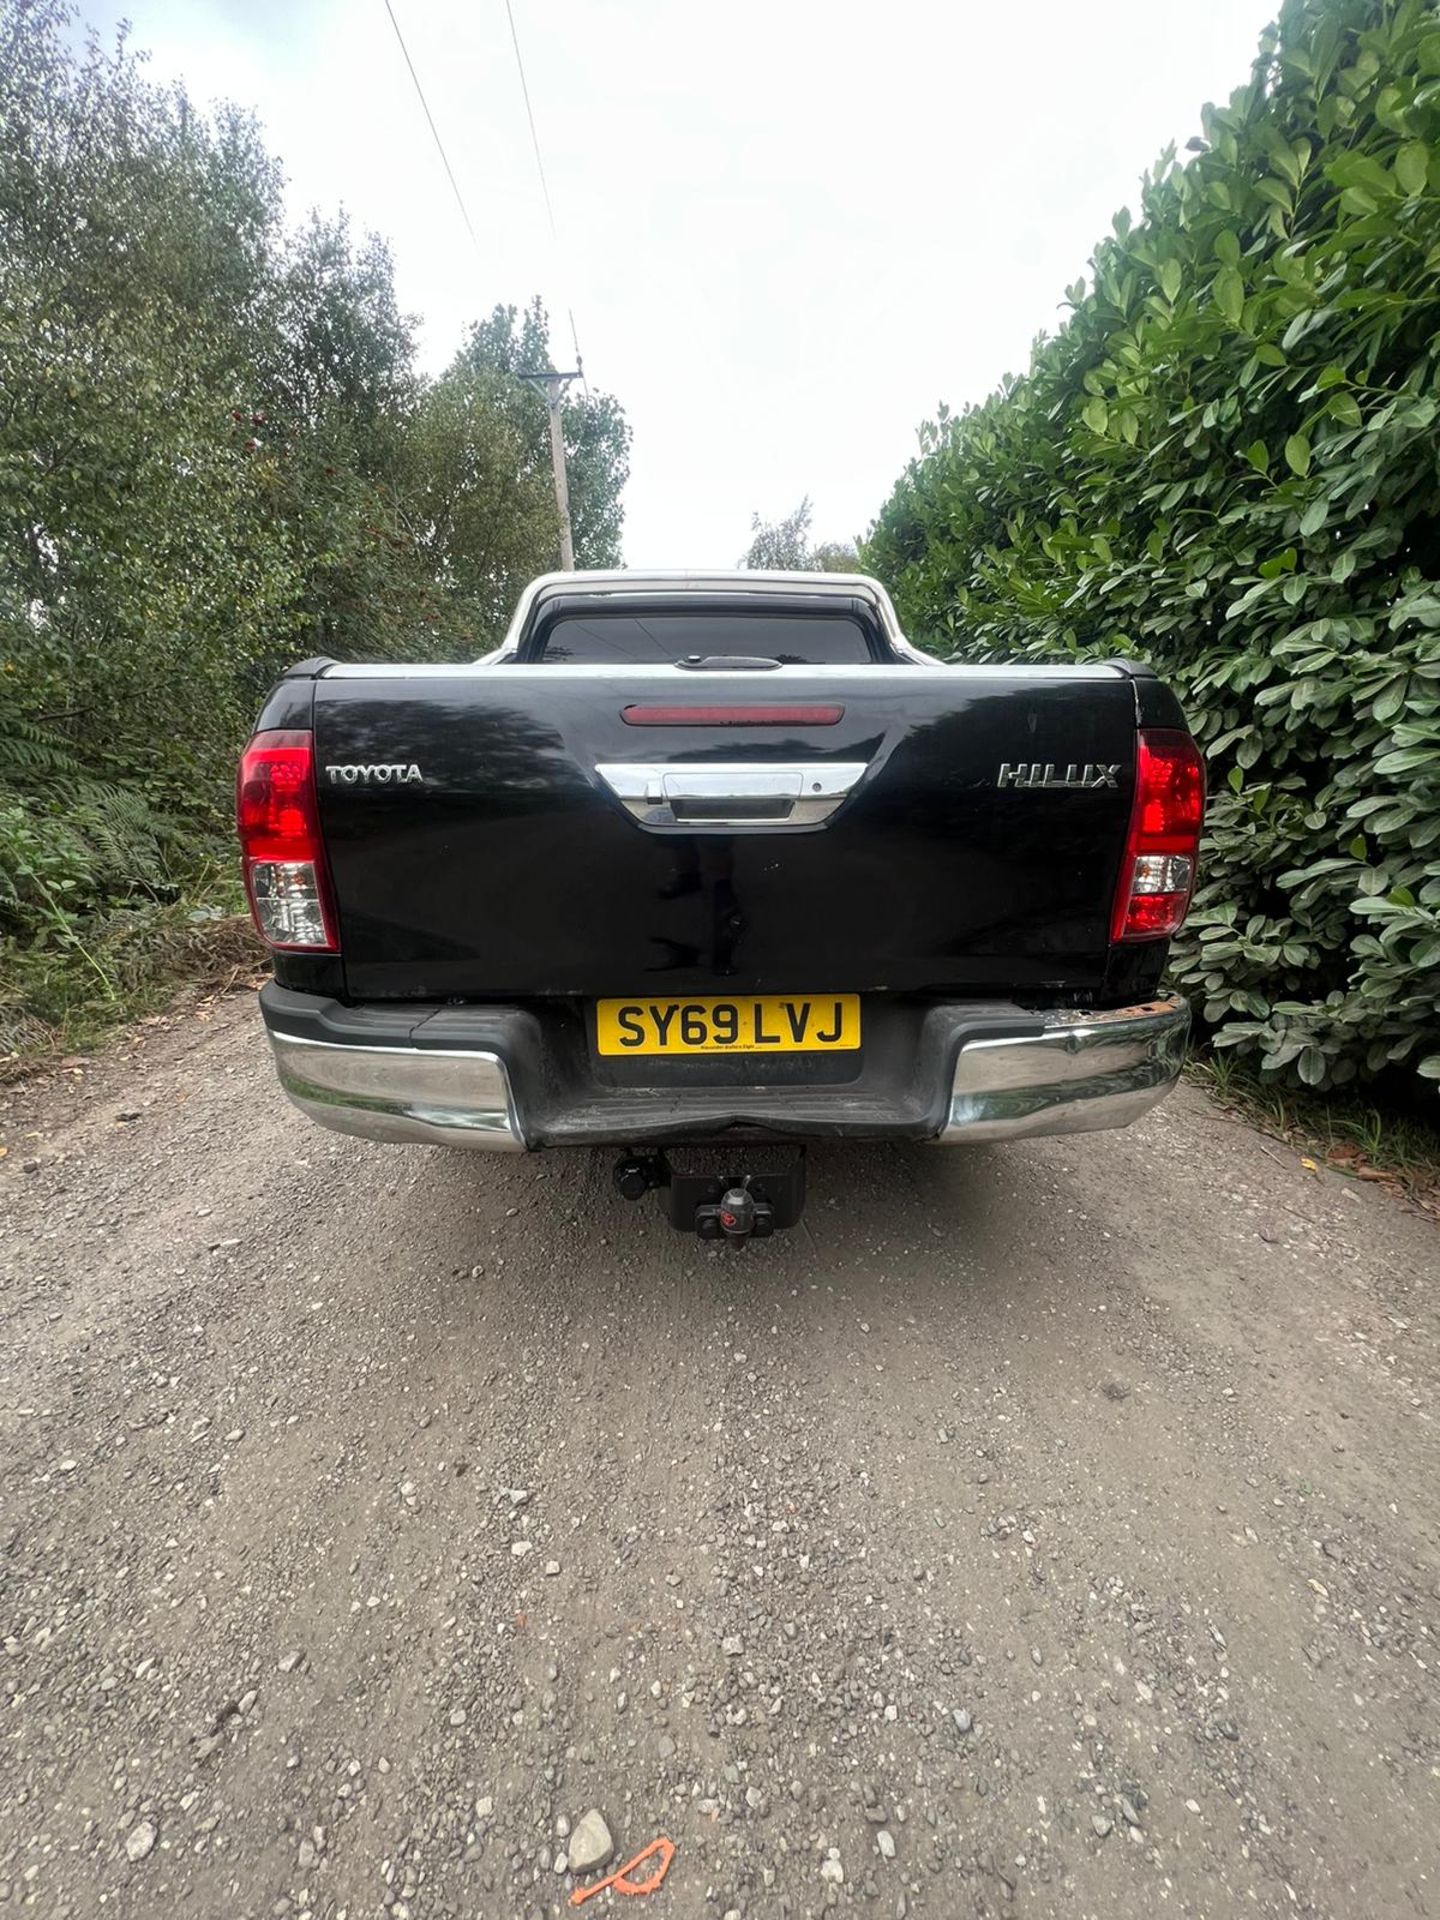 TOYOTA HILUX INVISIBLE 2019 FULL V5 - Image 10 of 15